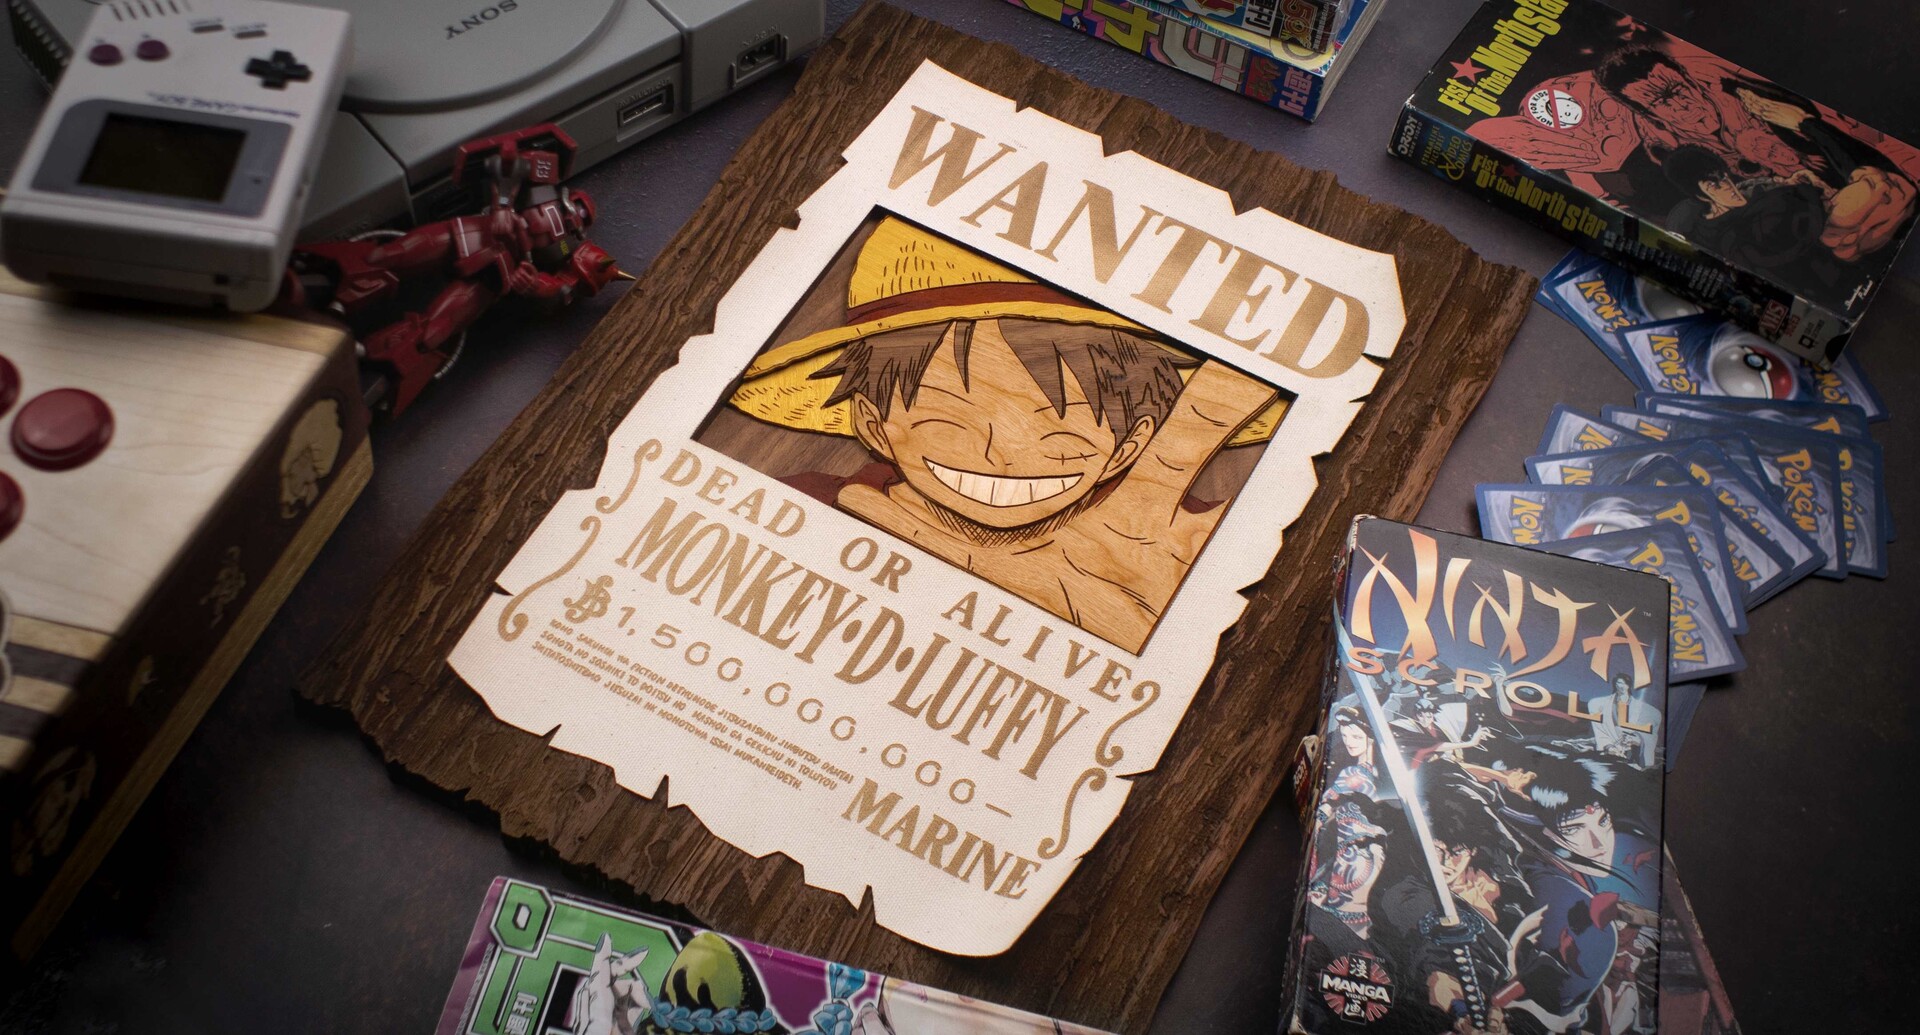 Brook Wanted Poster wallpaper by hwwallpapers  Download on ZEDGE  2b20